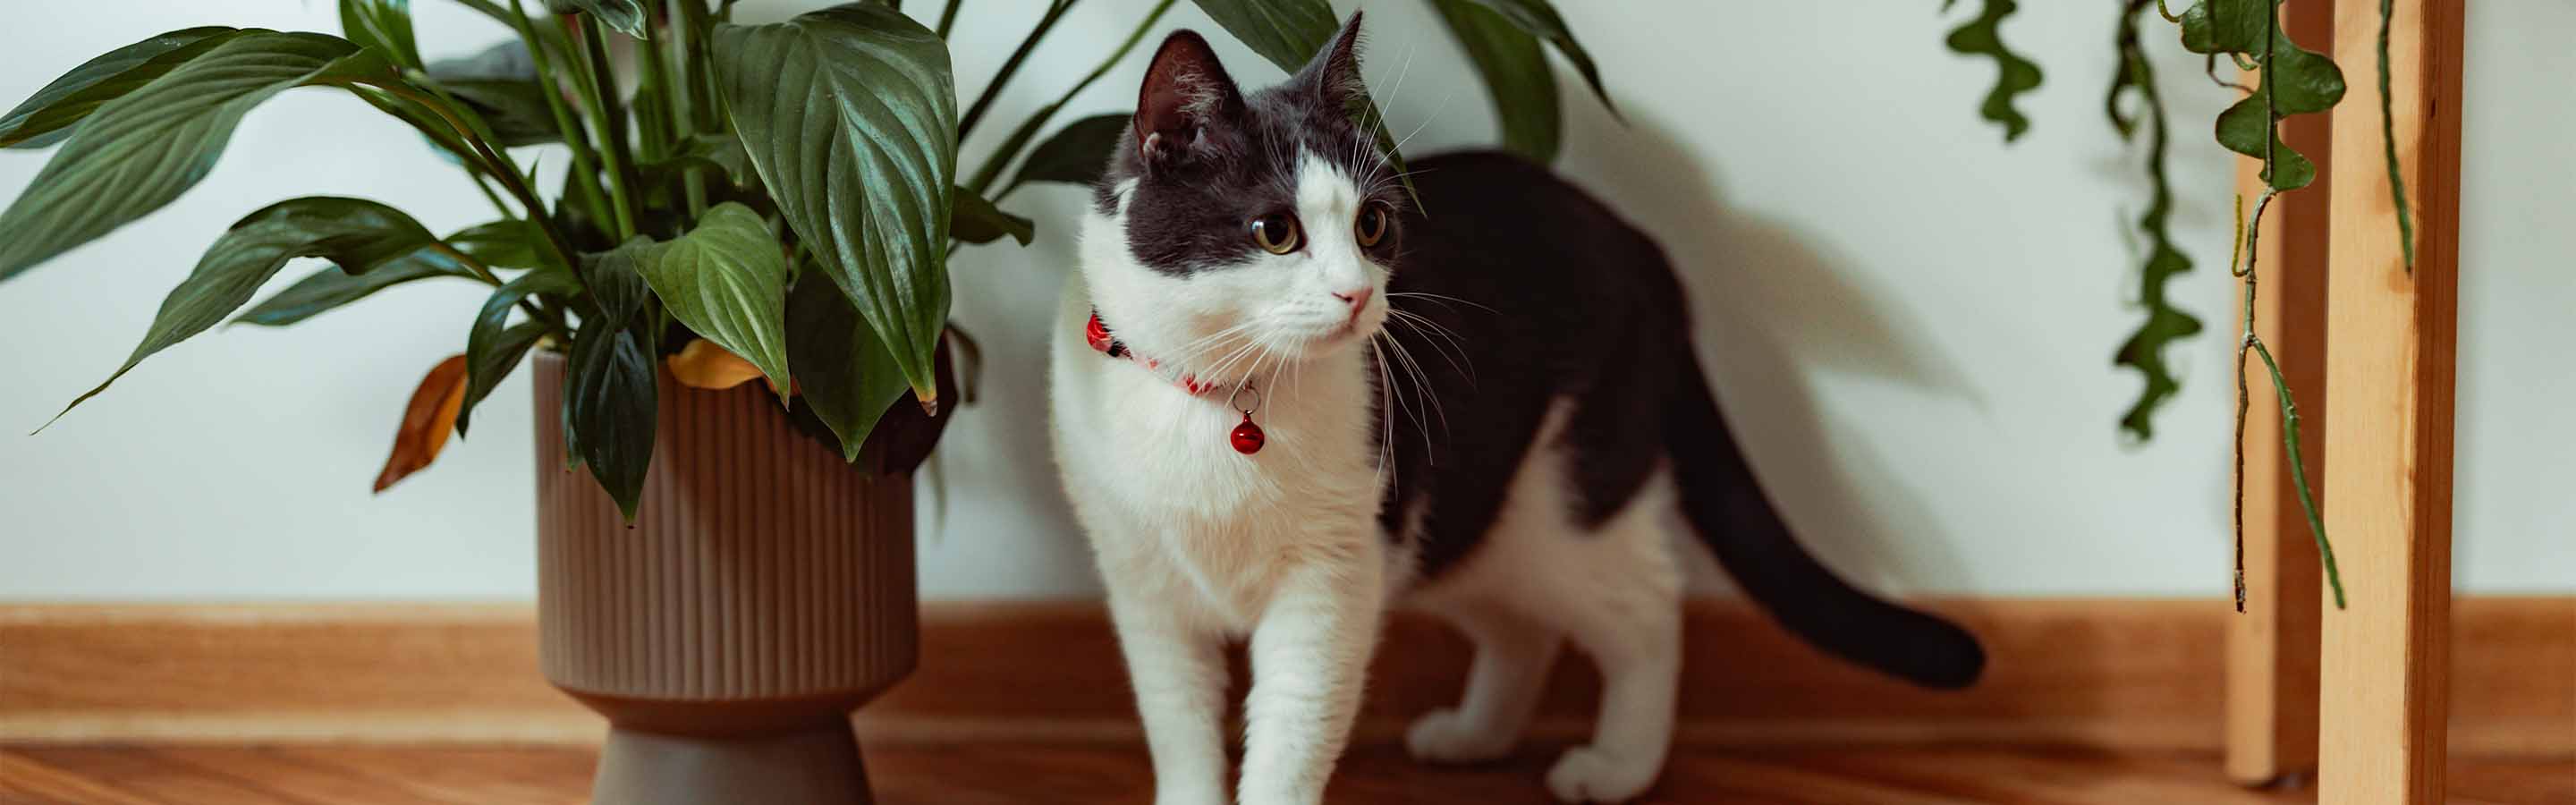 A cat stands indoors next to a potted lily.